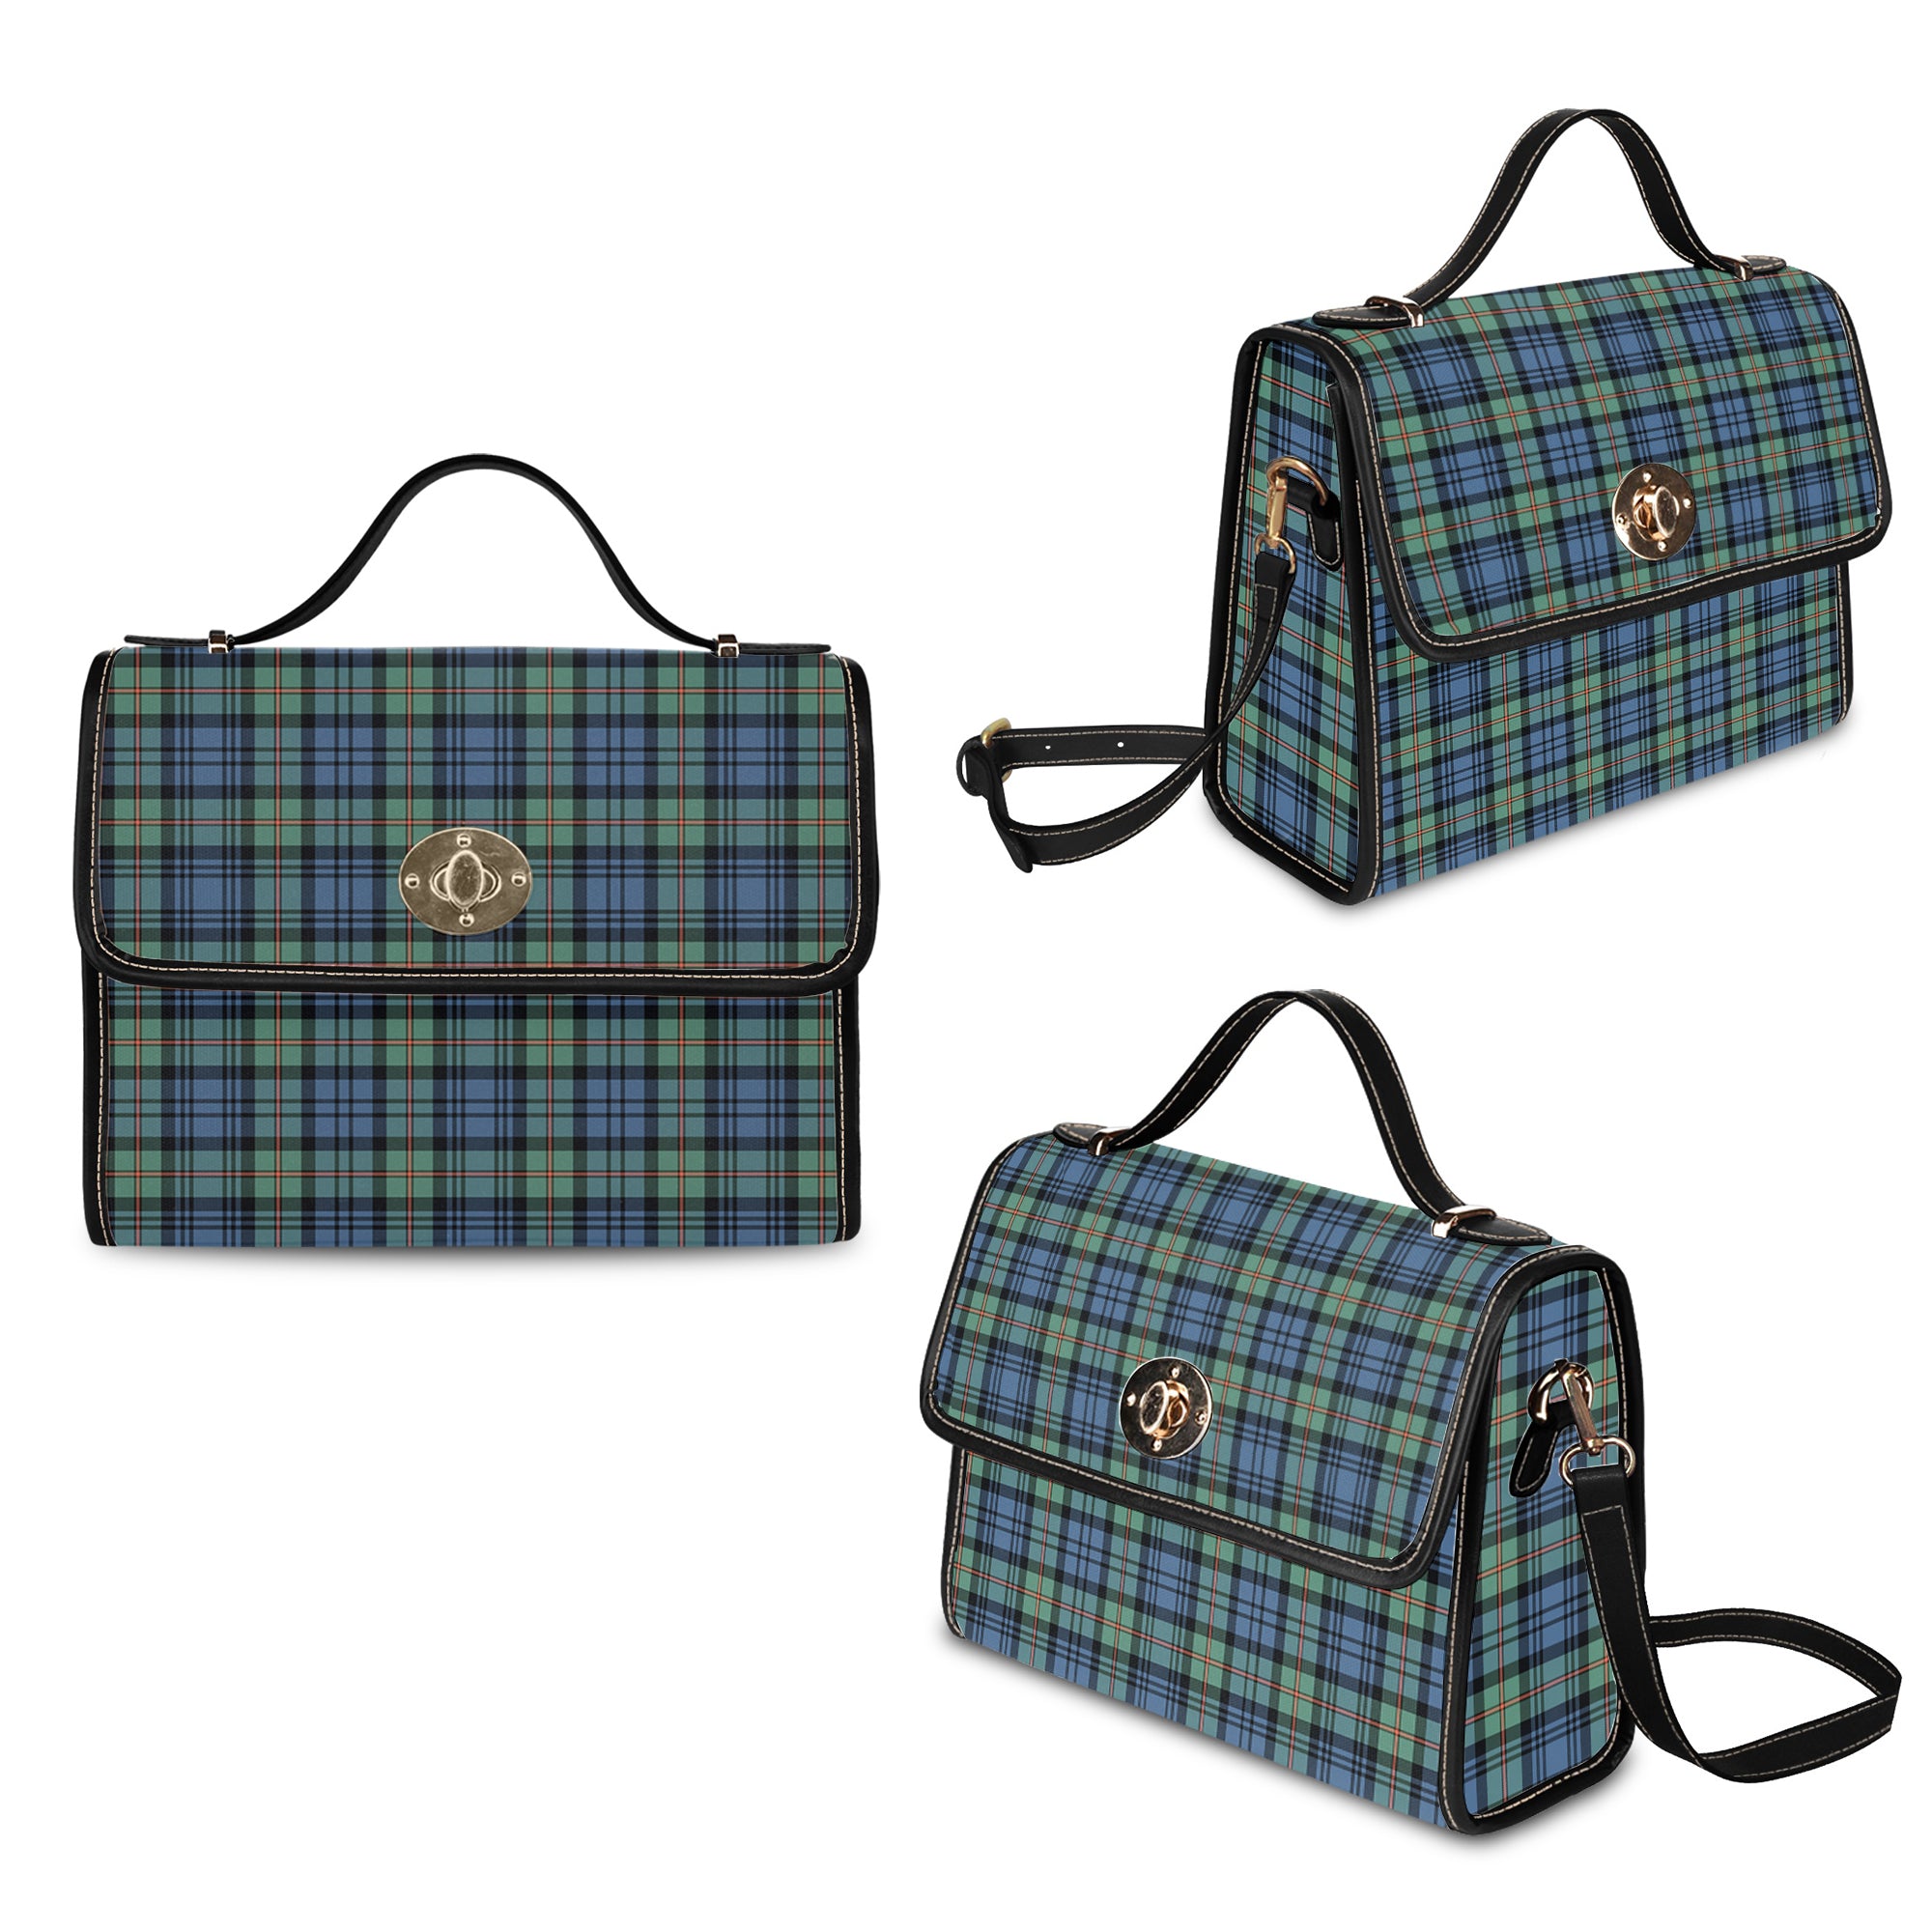 mackinlay-ancient-tartan-canvas-bag-with-leather-shoulder-strap